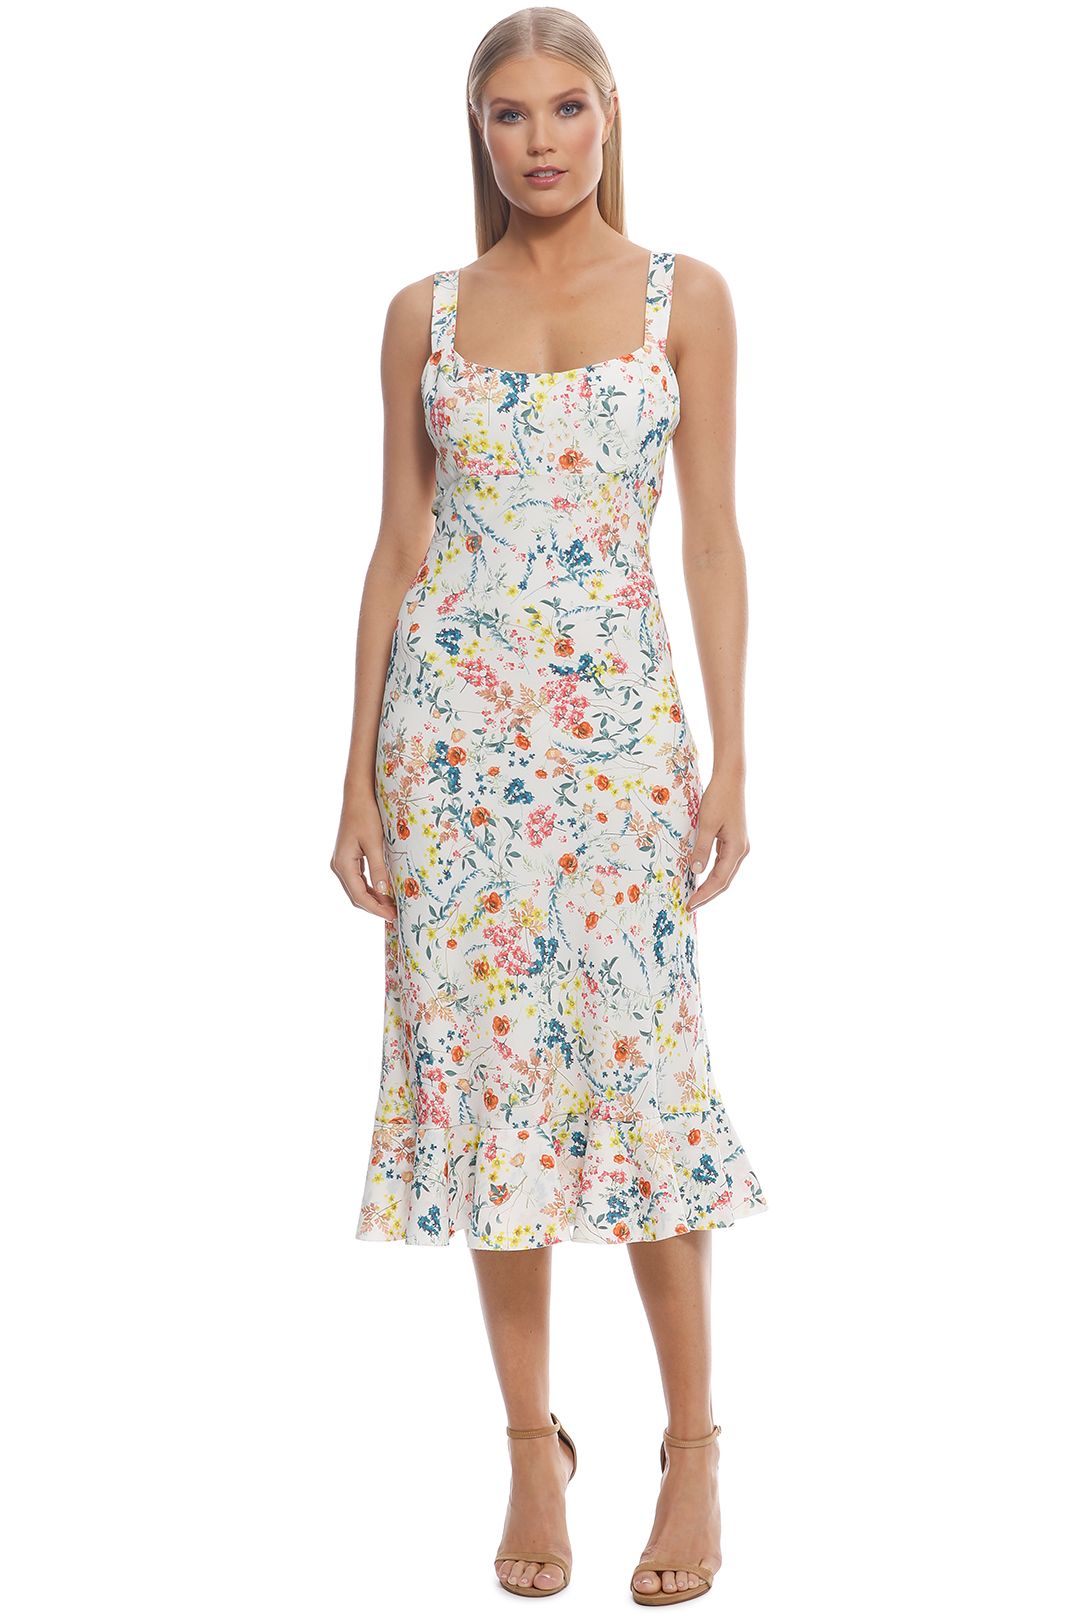 By Johnny - Ditsy Frill Bias Midi Dress - Ivory Floral - Front